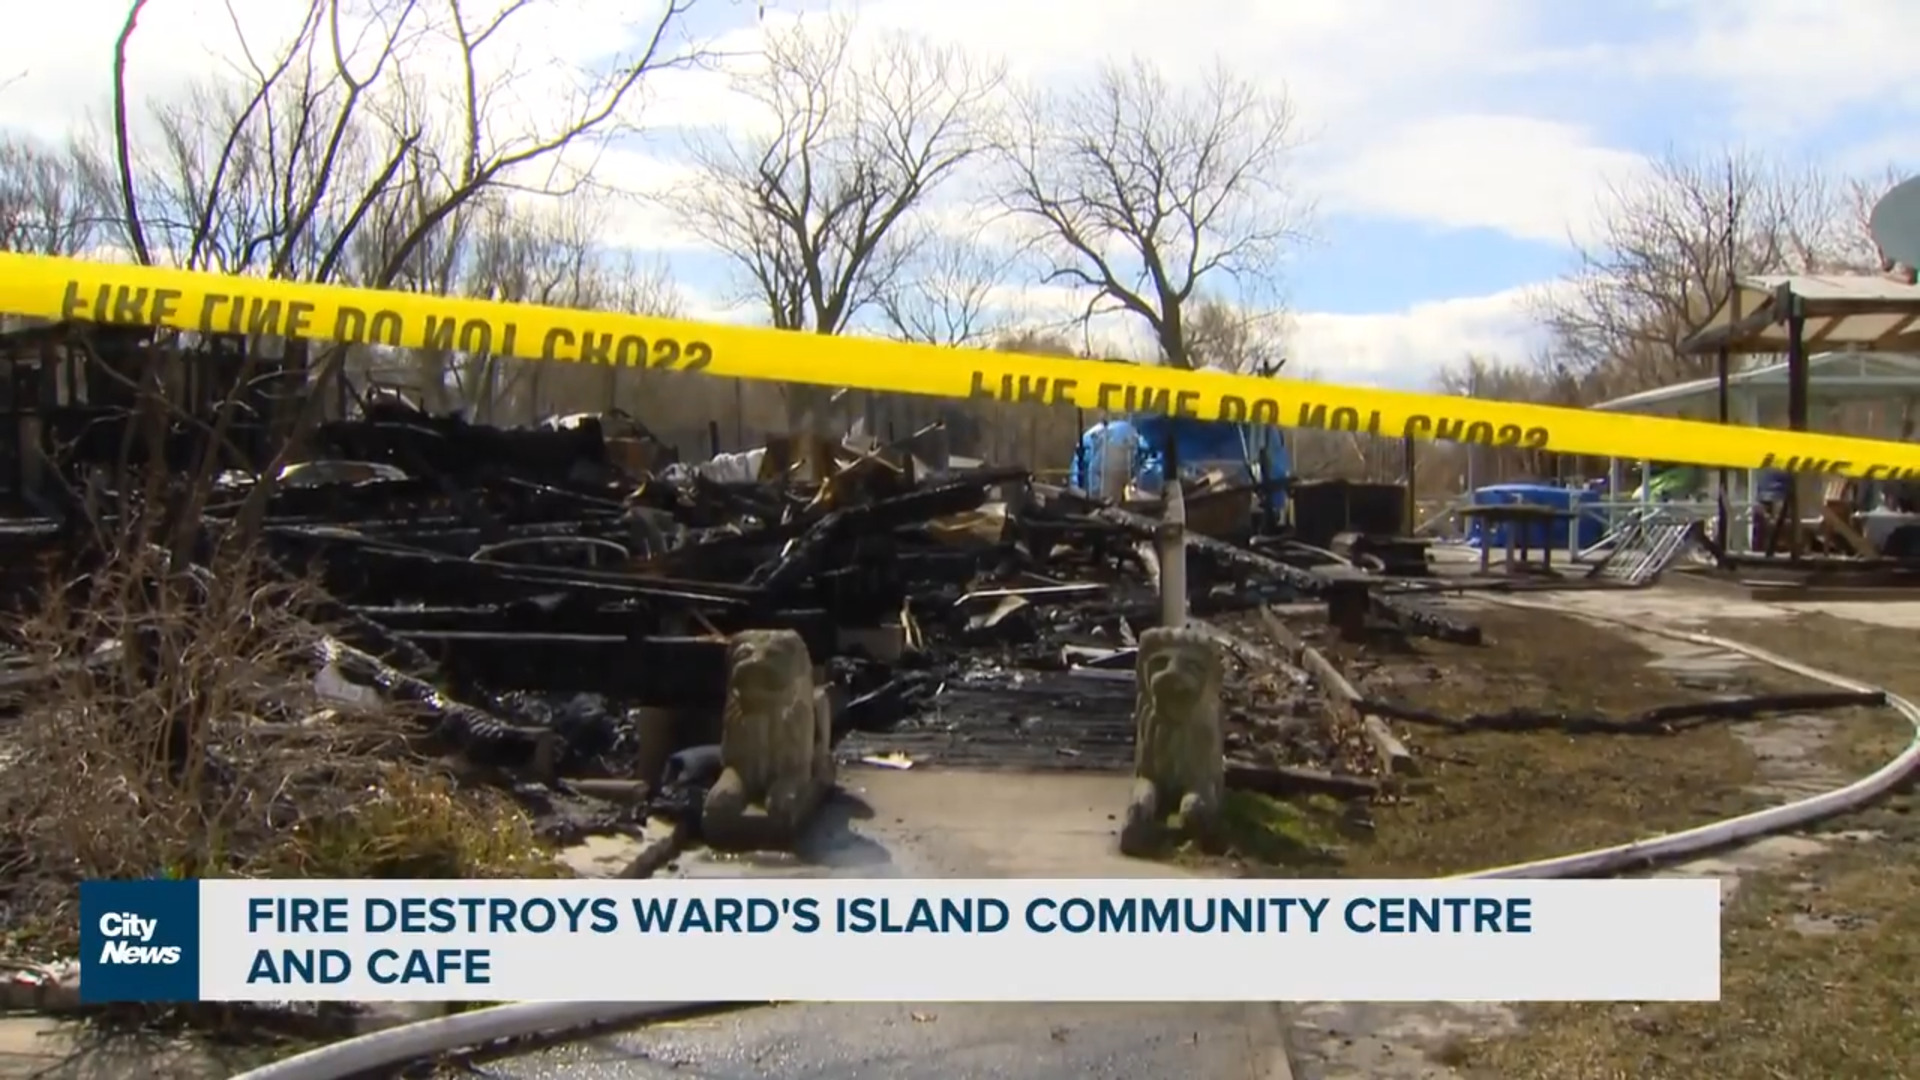 Fire destroys Ward's Island Community Centre and Cafe